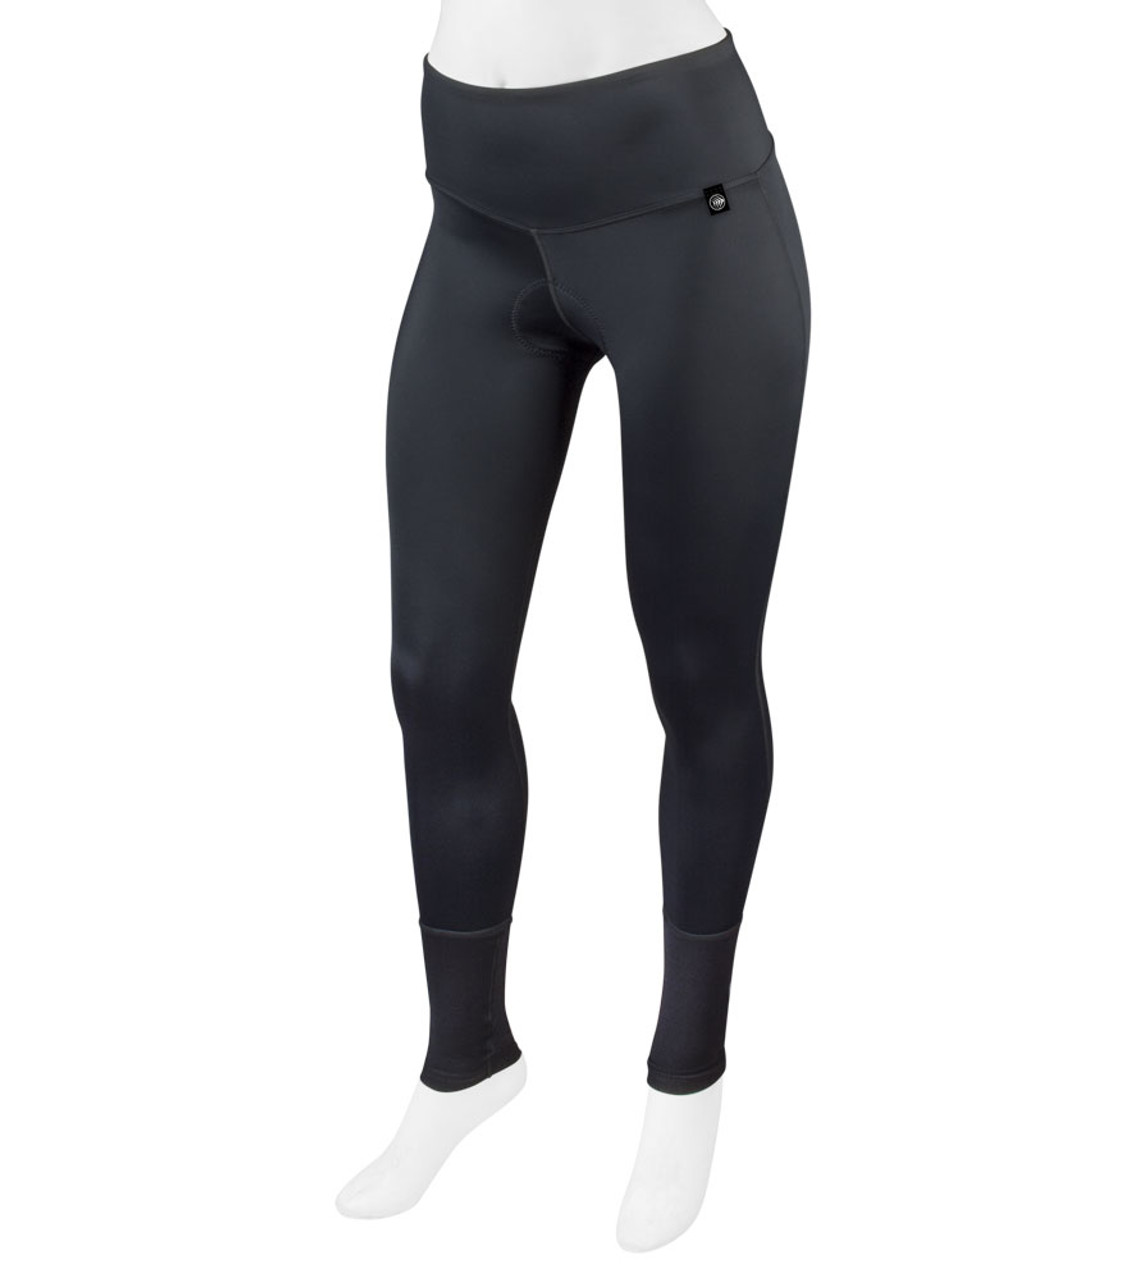 Brisk Bike Thick Warm Padded Cycling Compression Tights Pants